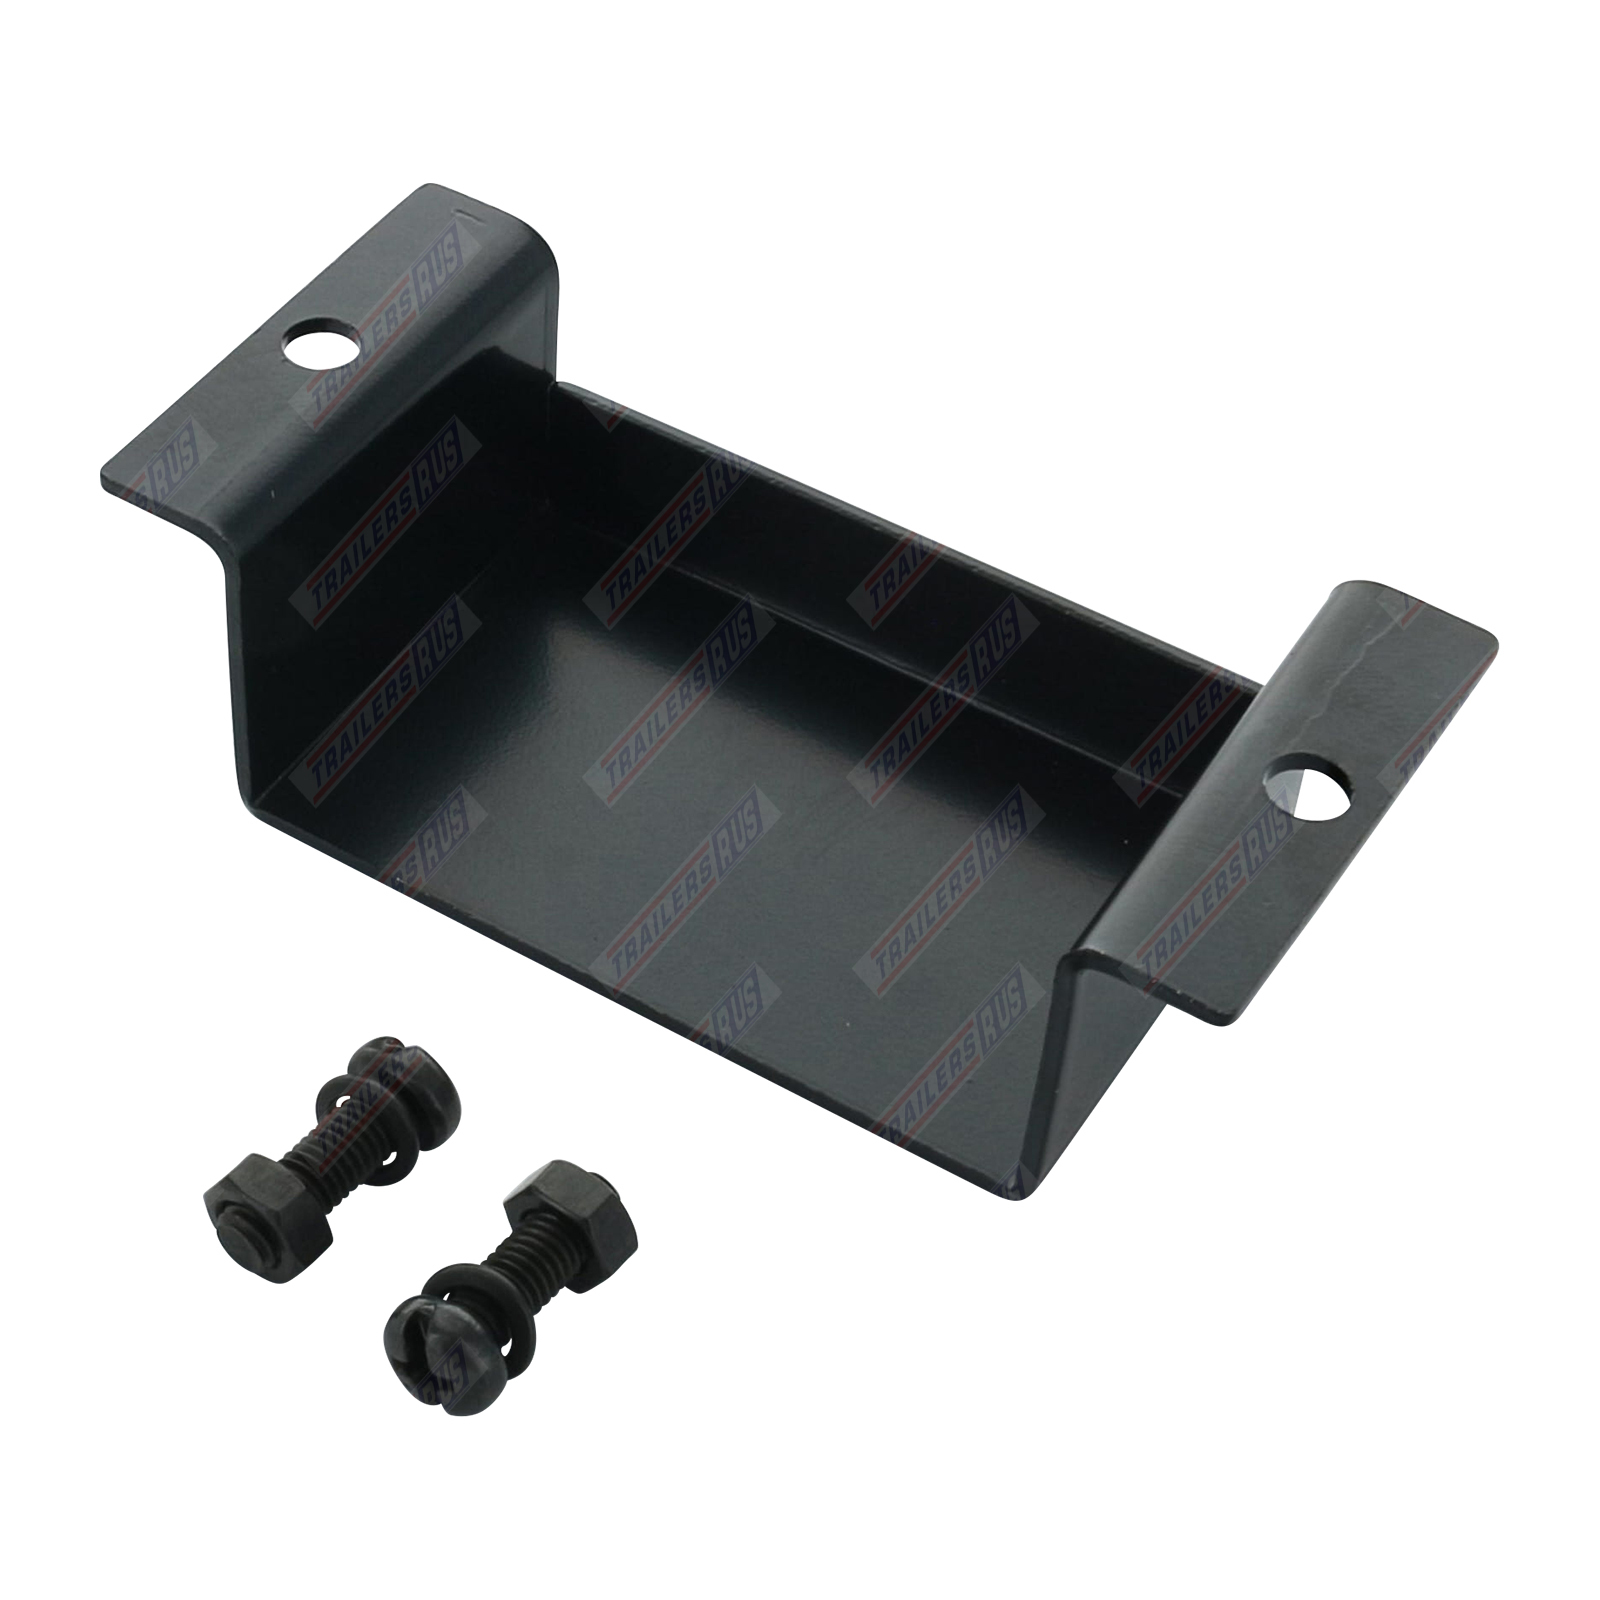 Connector Socket Mounting Bracket Keenso Right Angle Plug Socket Bracket for 7 Pin Caravan Towing Trailer Connector with Complete Screws & Nuts Black 